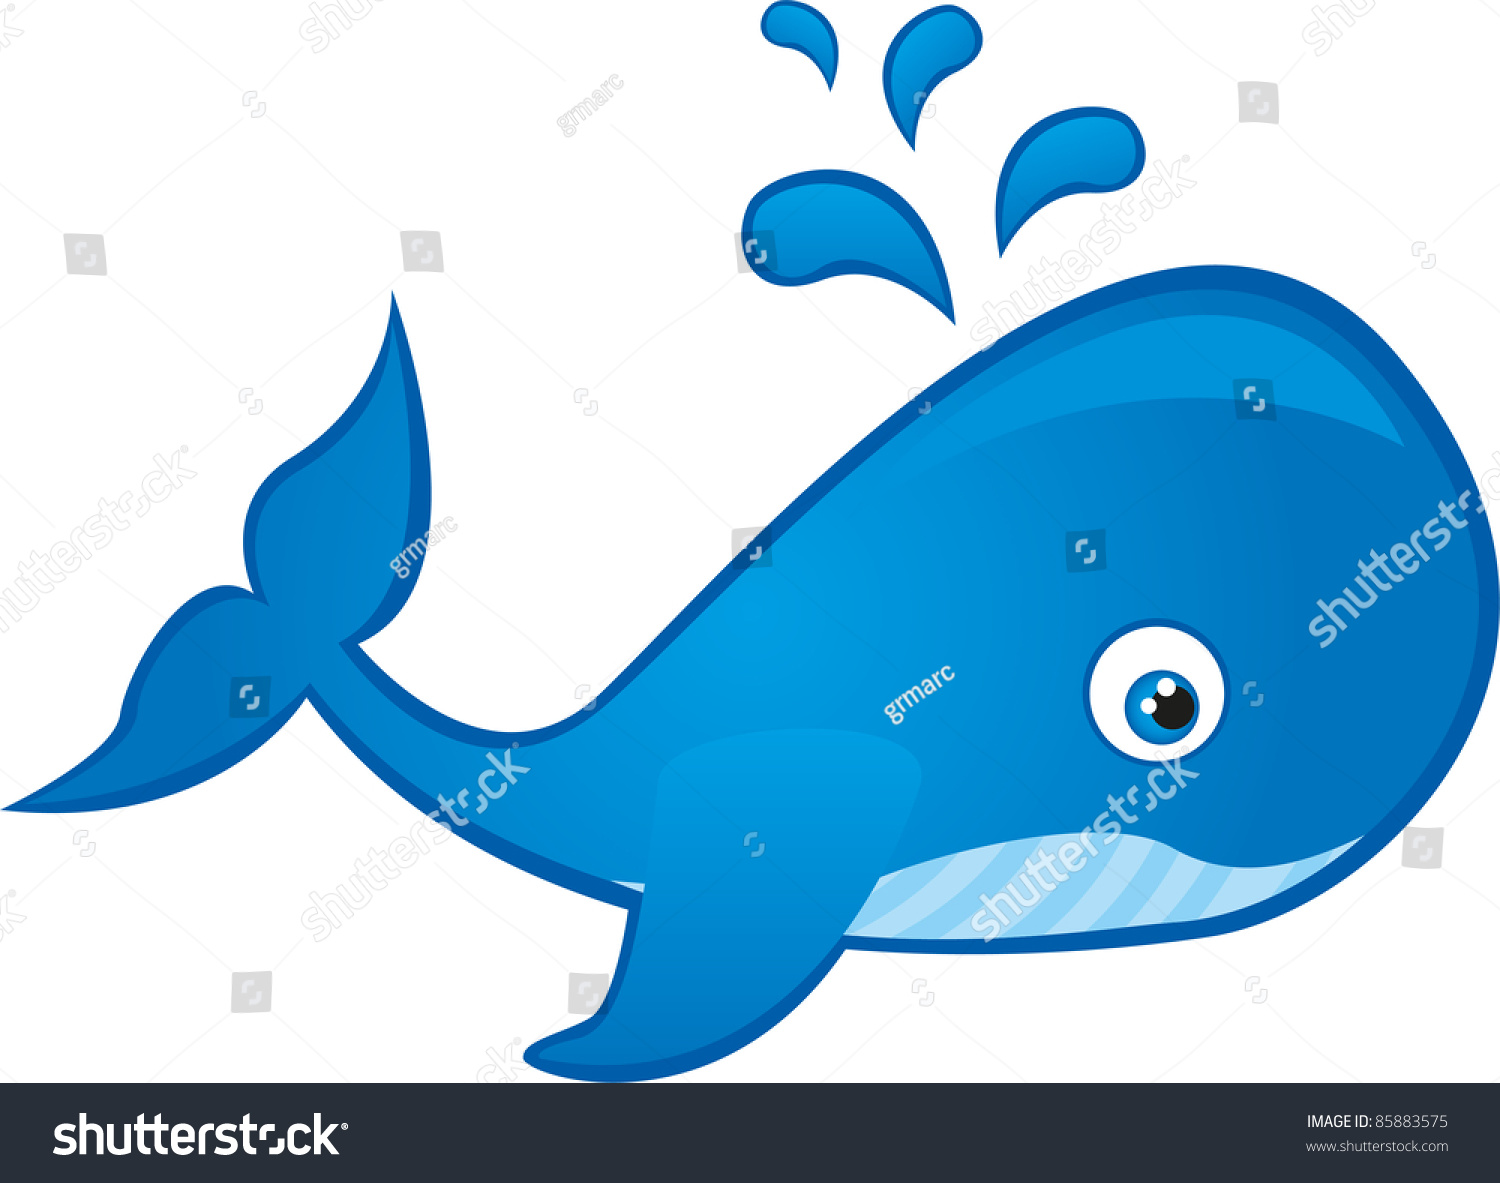 Blue Whale Cartoon Isolated Over White Stock Vector 85883575 - Shutterstock